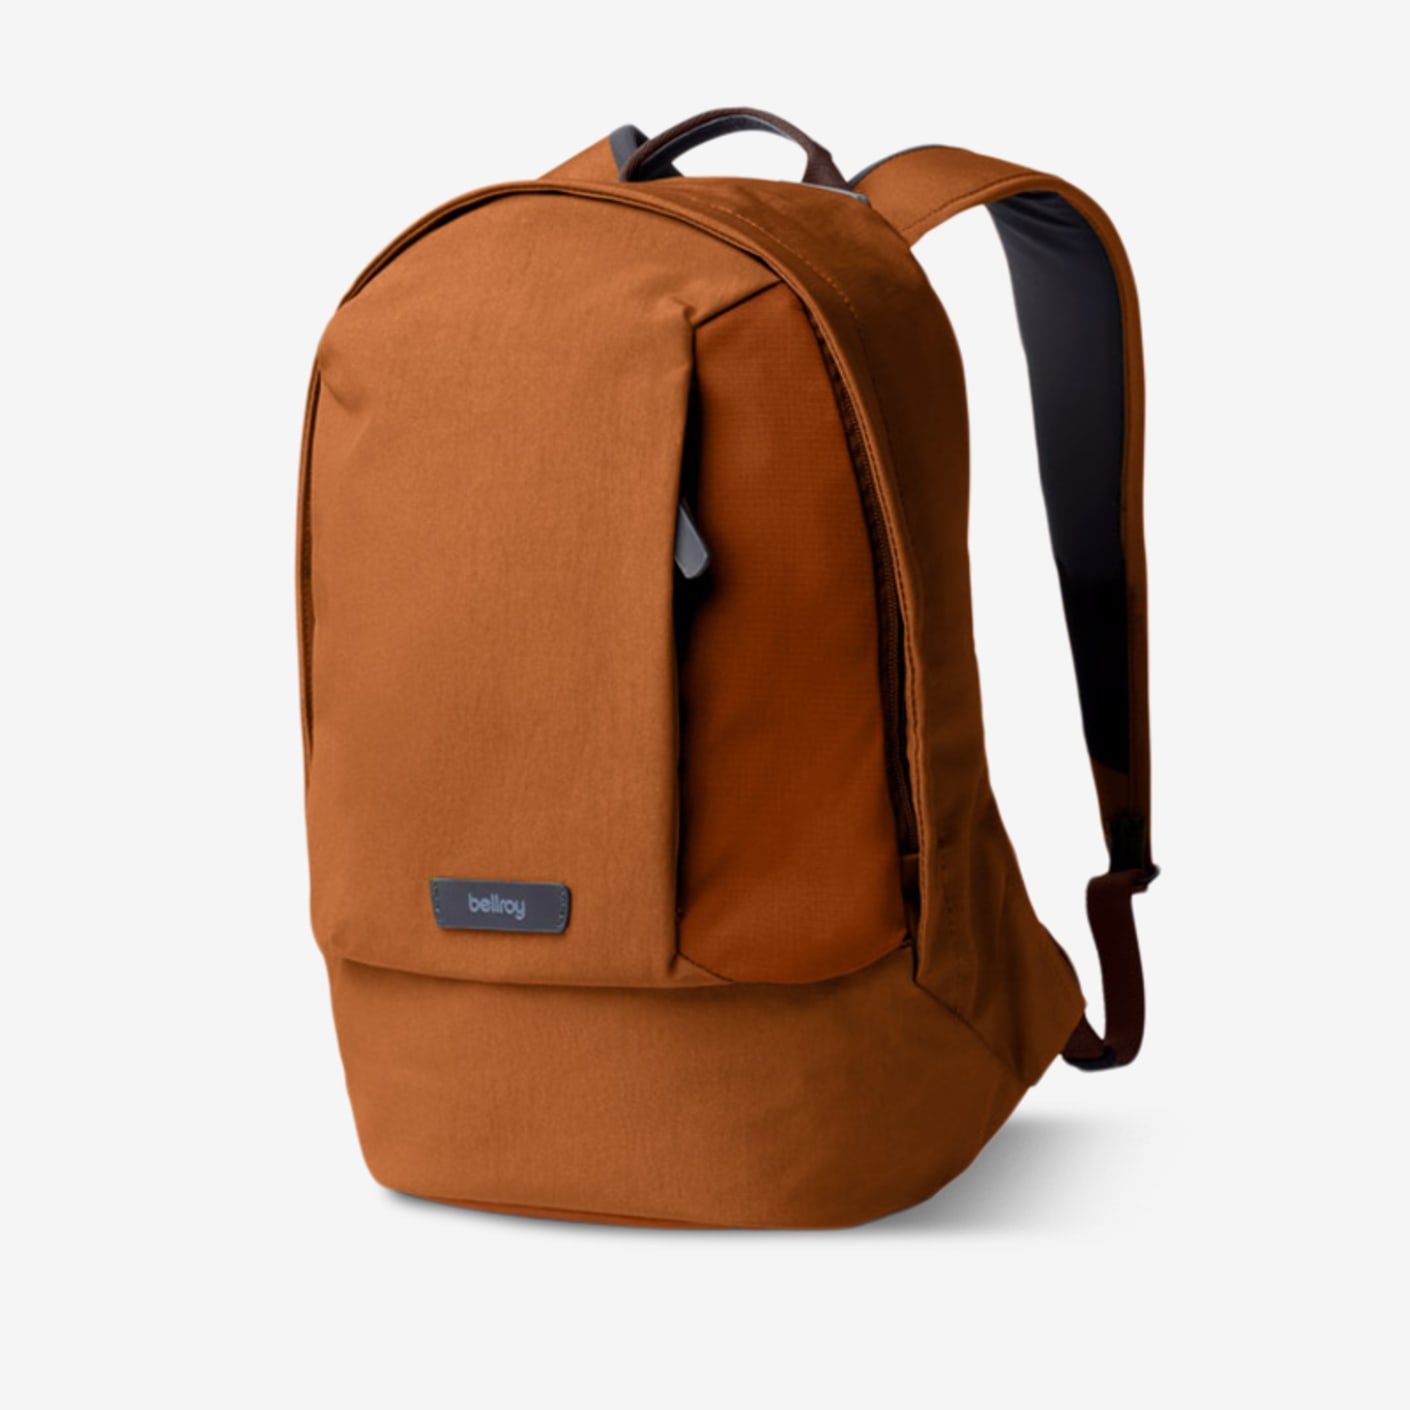 Bellroy Classic Backpack Compact | Bespoke Post